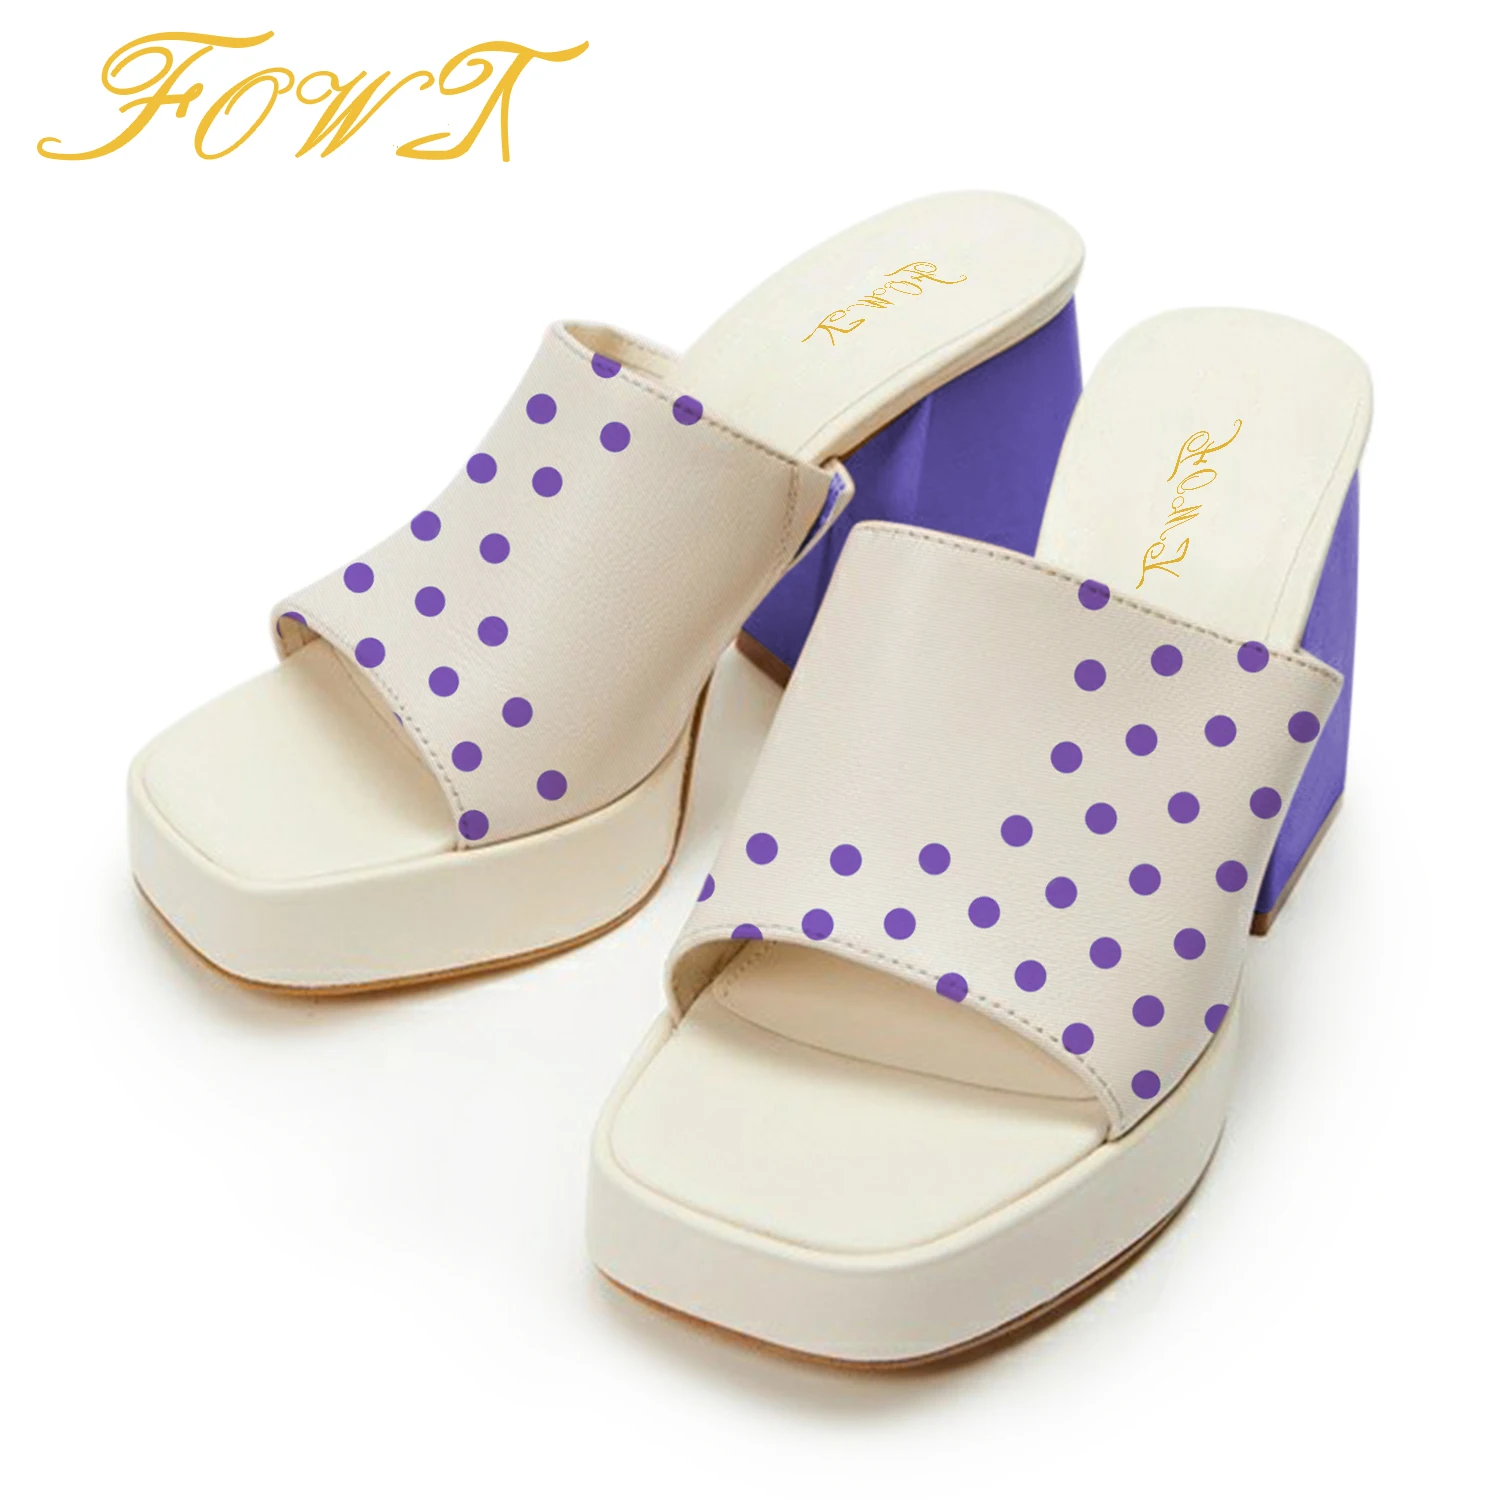 

Polka Dot Platform High Chunky Heels Women's Slippers Open Toe Sandals Ladies Outside Fashion Slides Large Size 14 16 Shoes FOWT